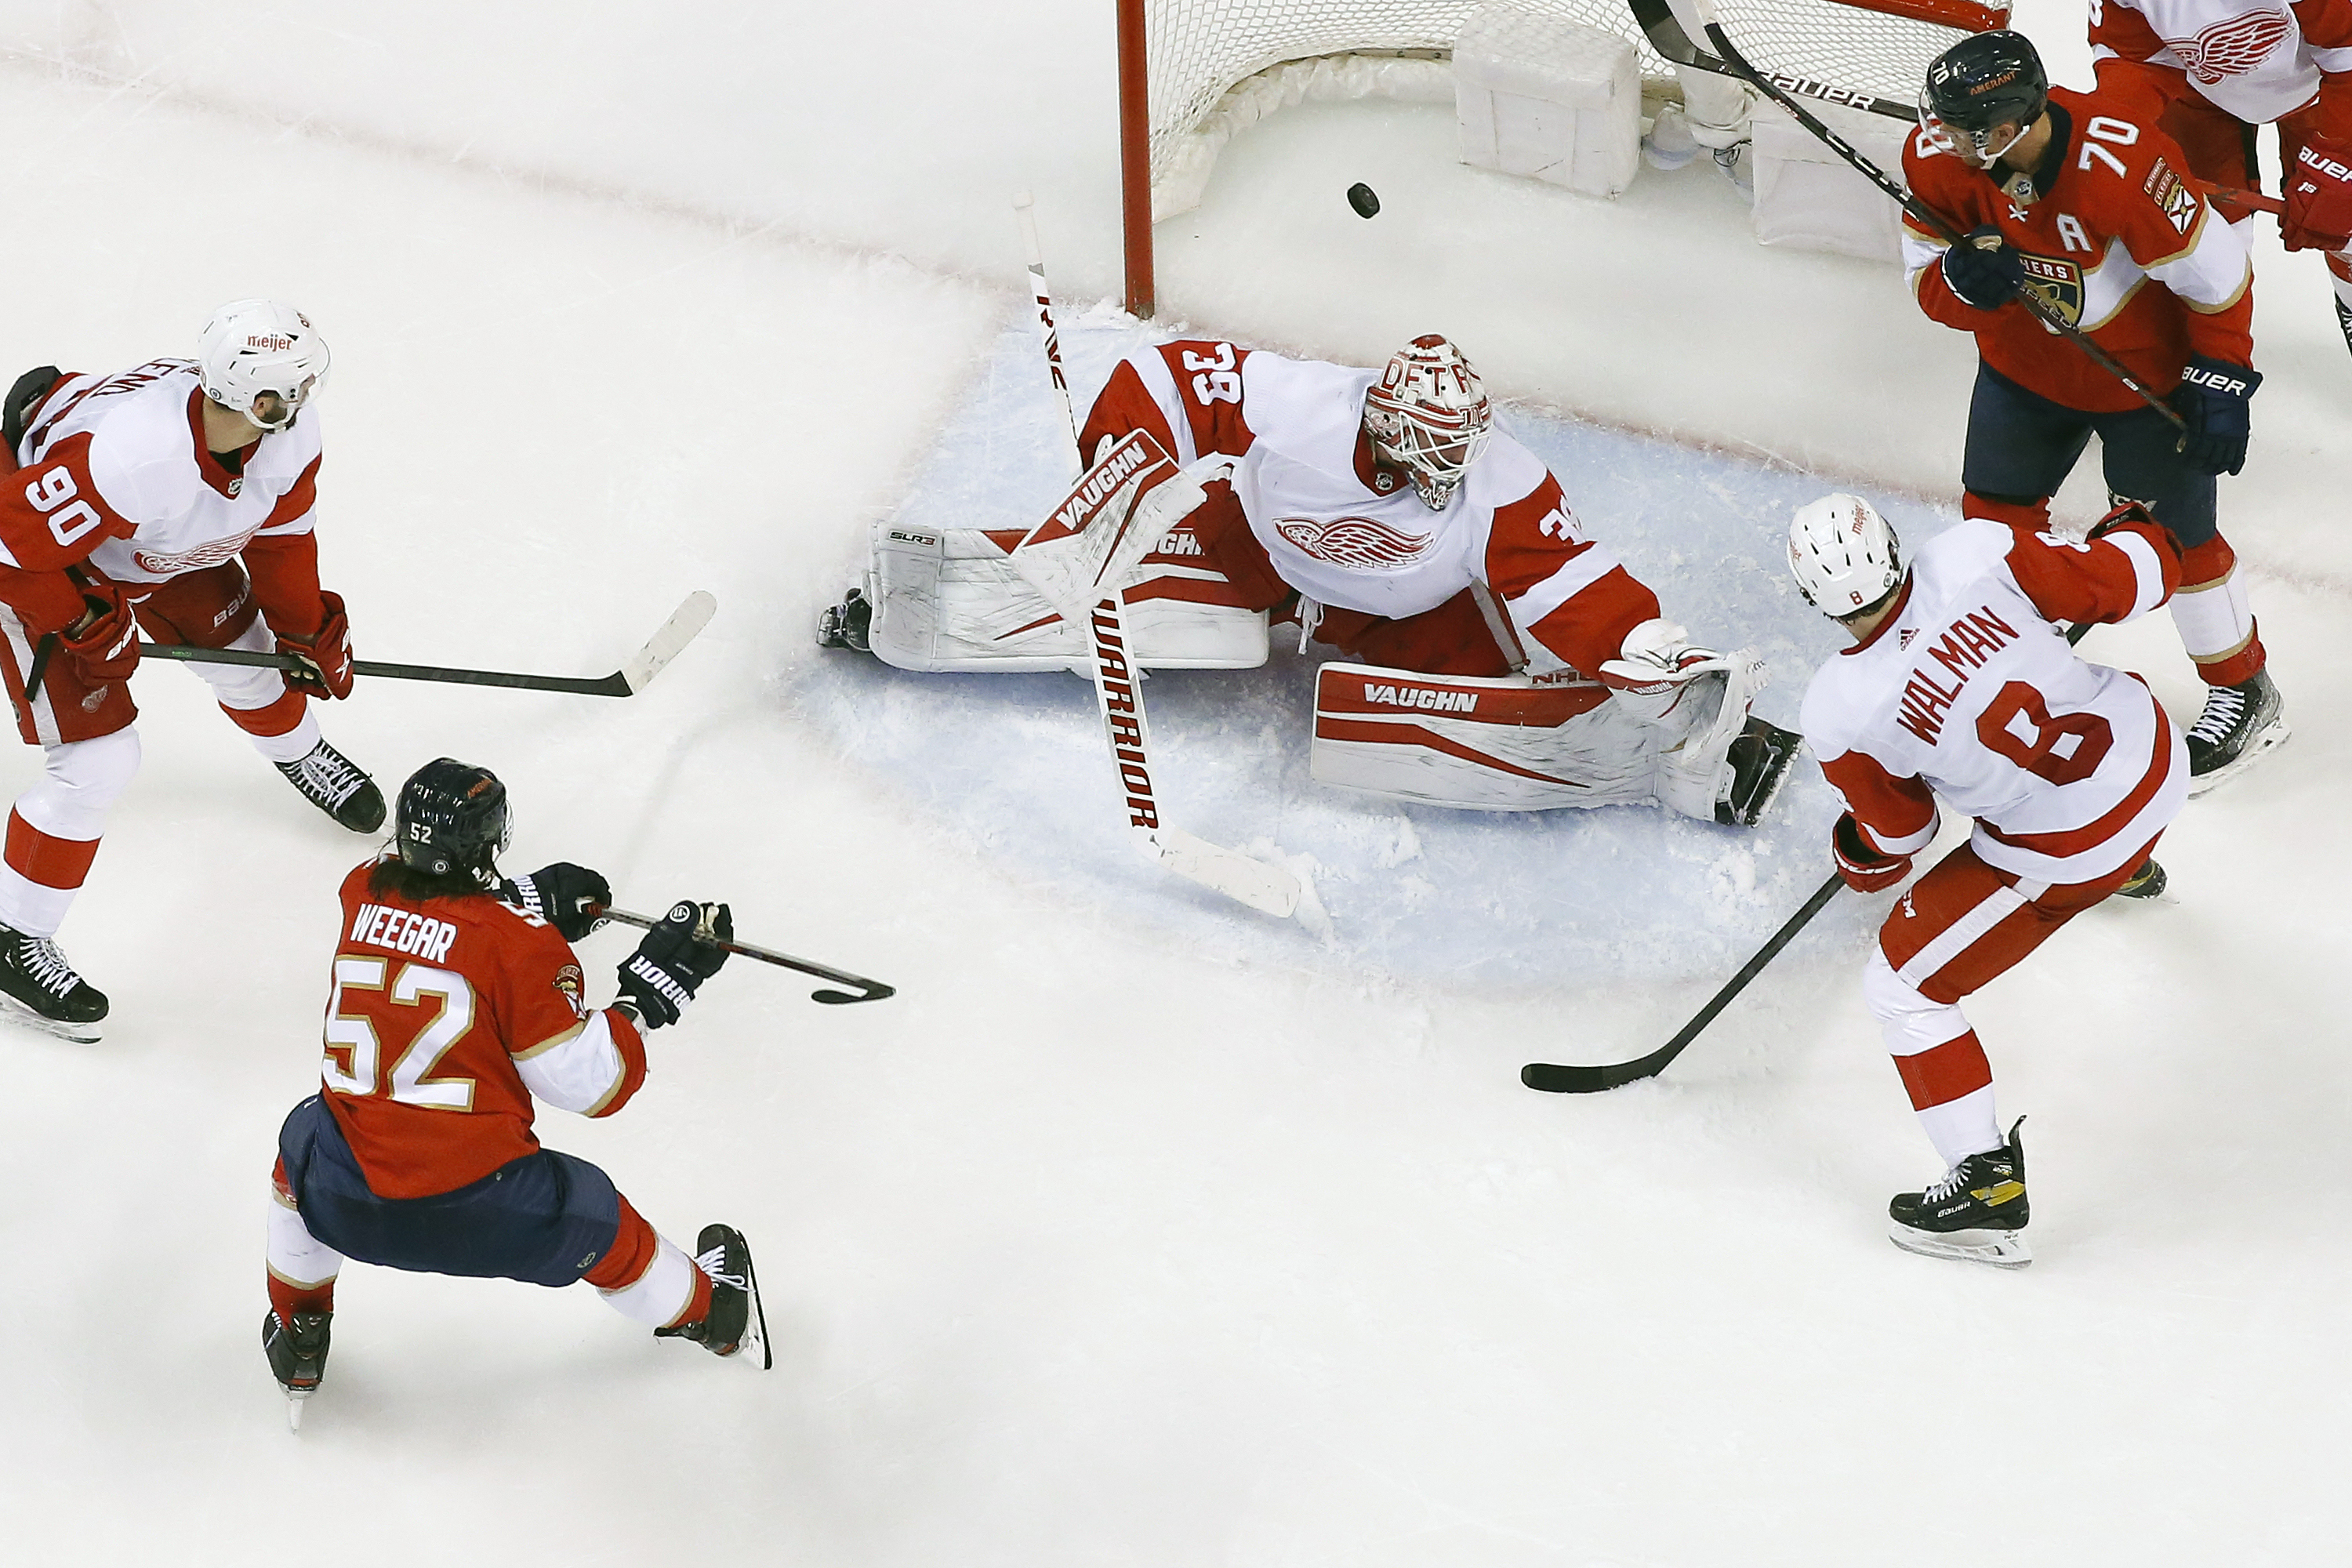 Detroit Red Wings v Florida Panthers